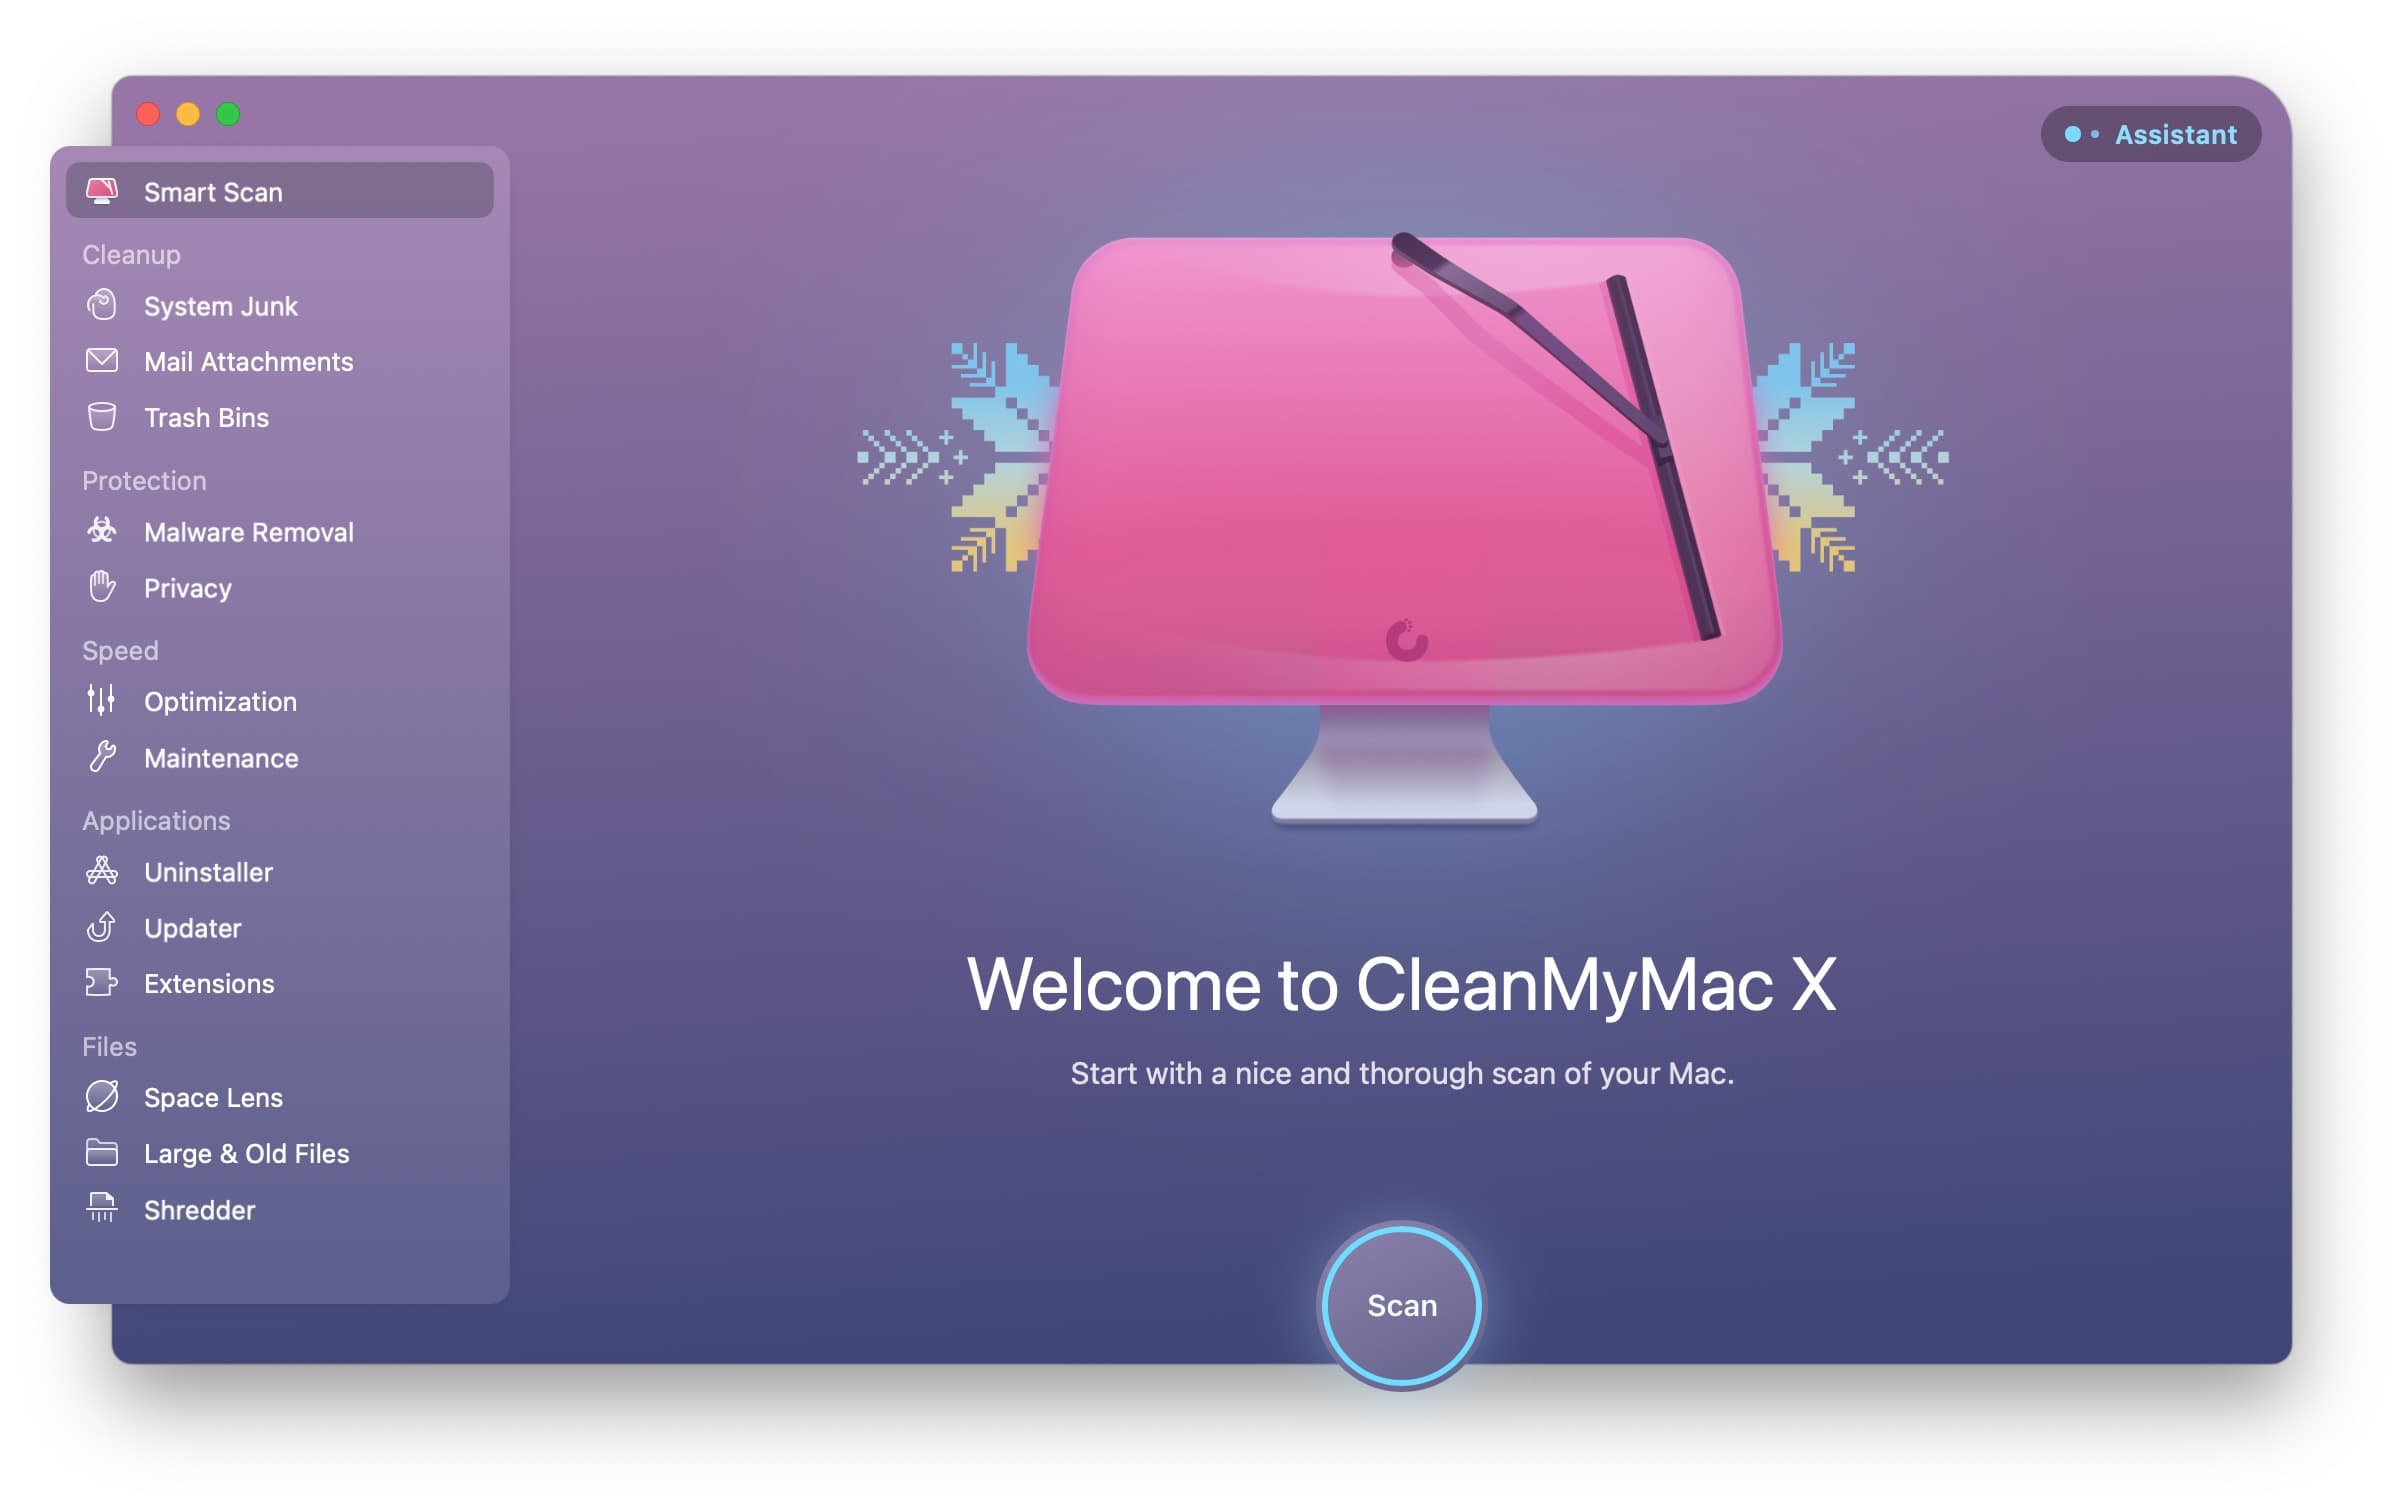 Start a Smart Scan on CleanMyMac X by clicking “Run.”